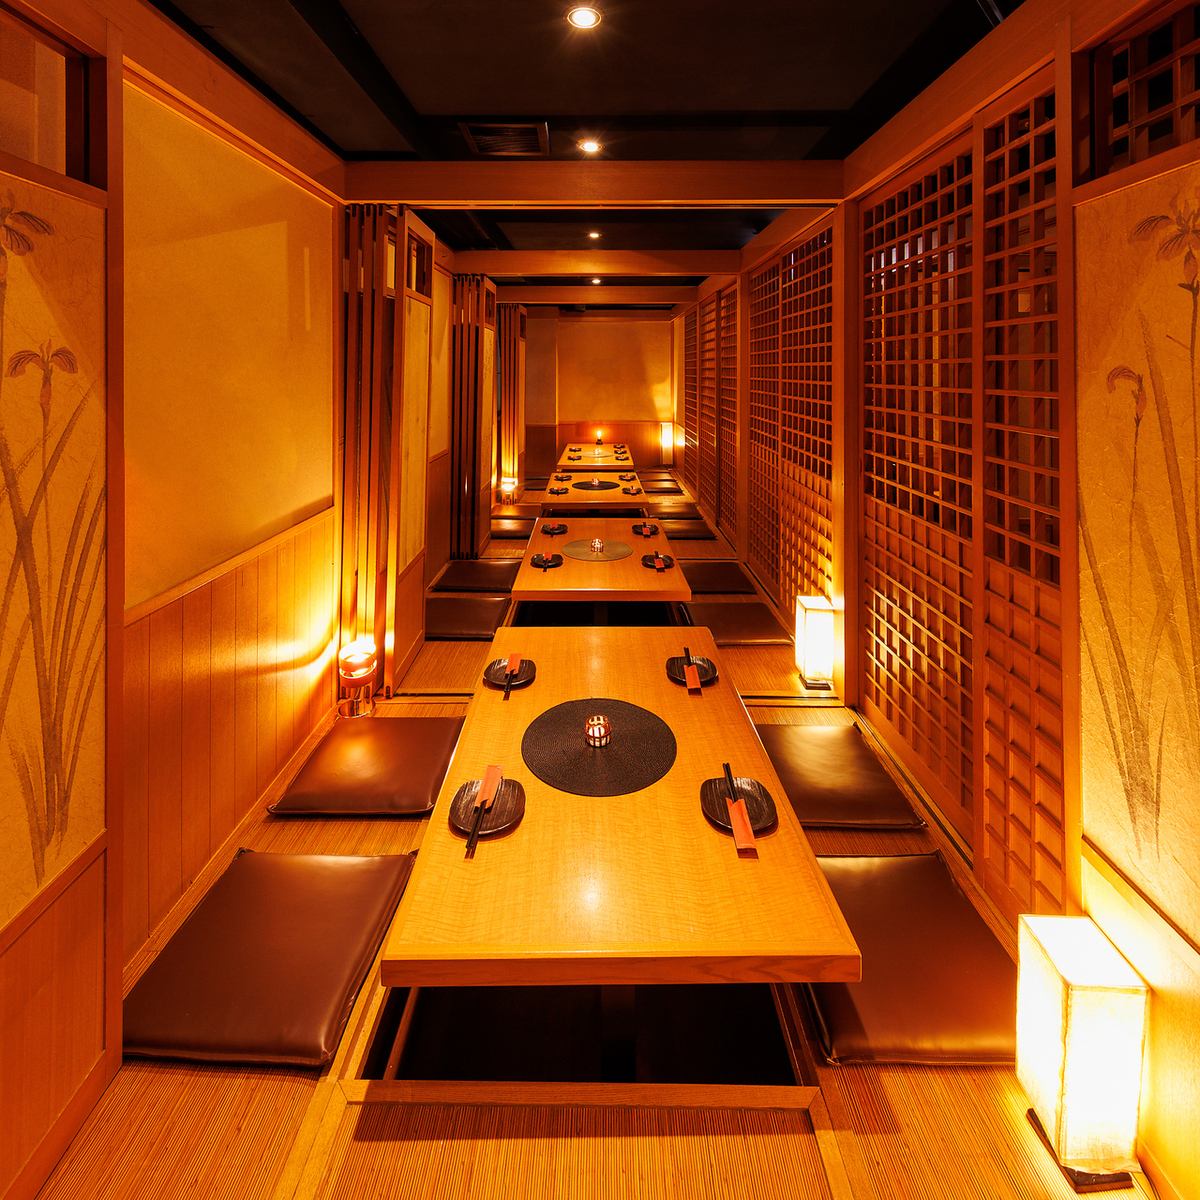 ★Private room for 10 or more people★Relaxing banquet in a comfortable Japanese space♪